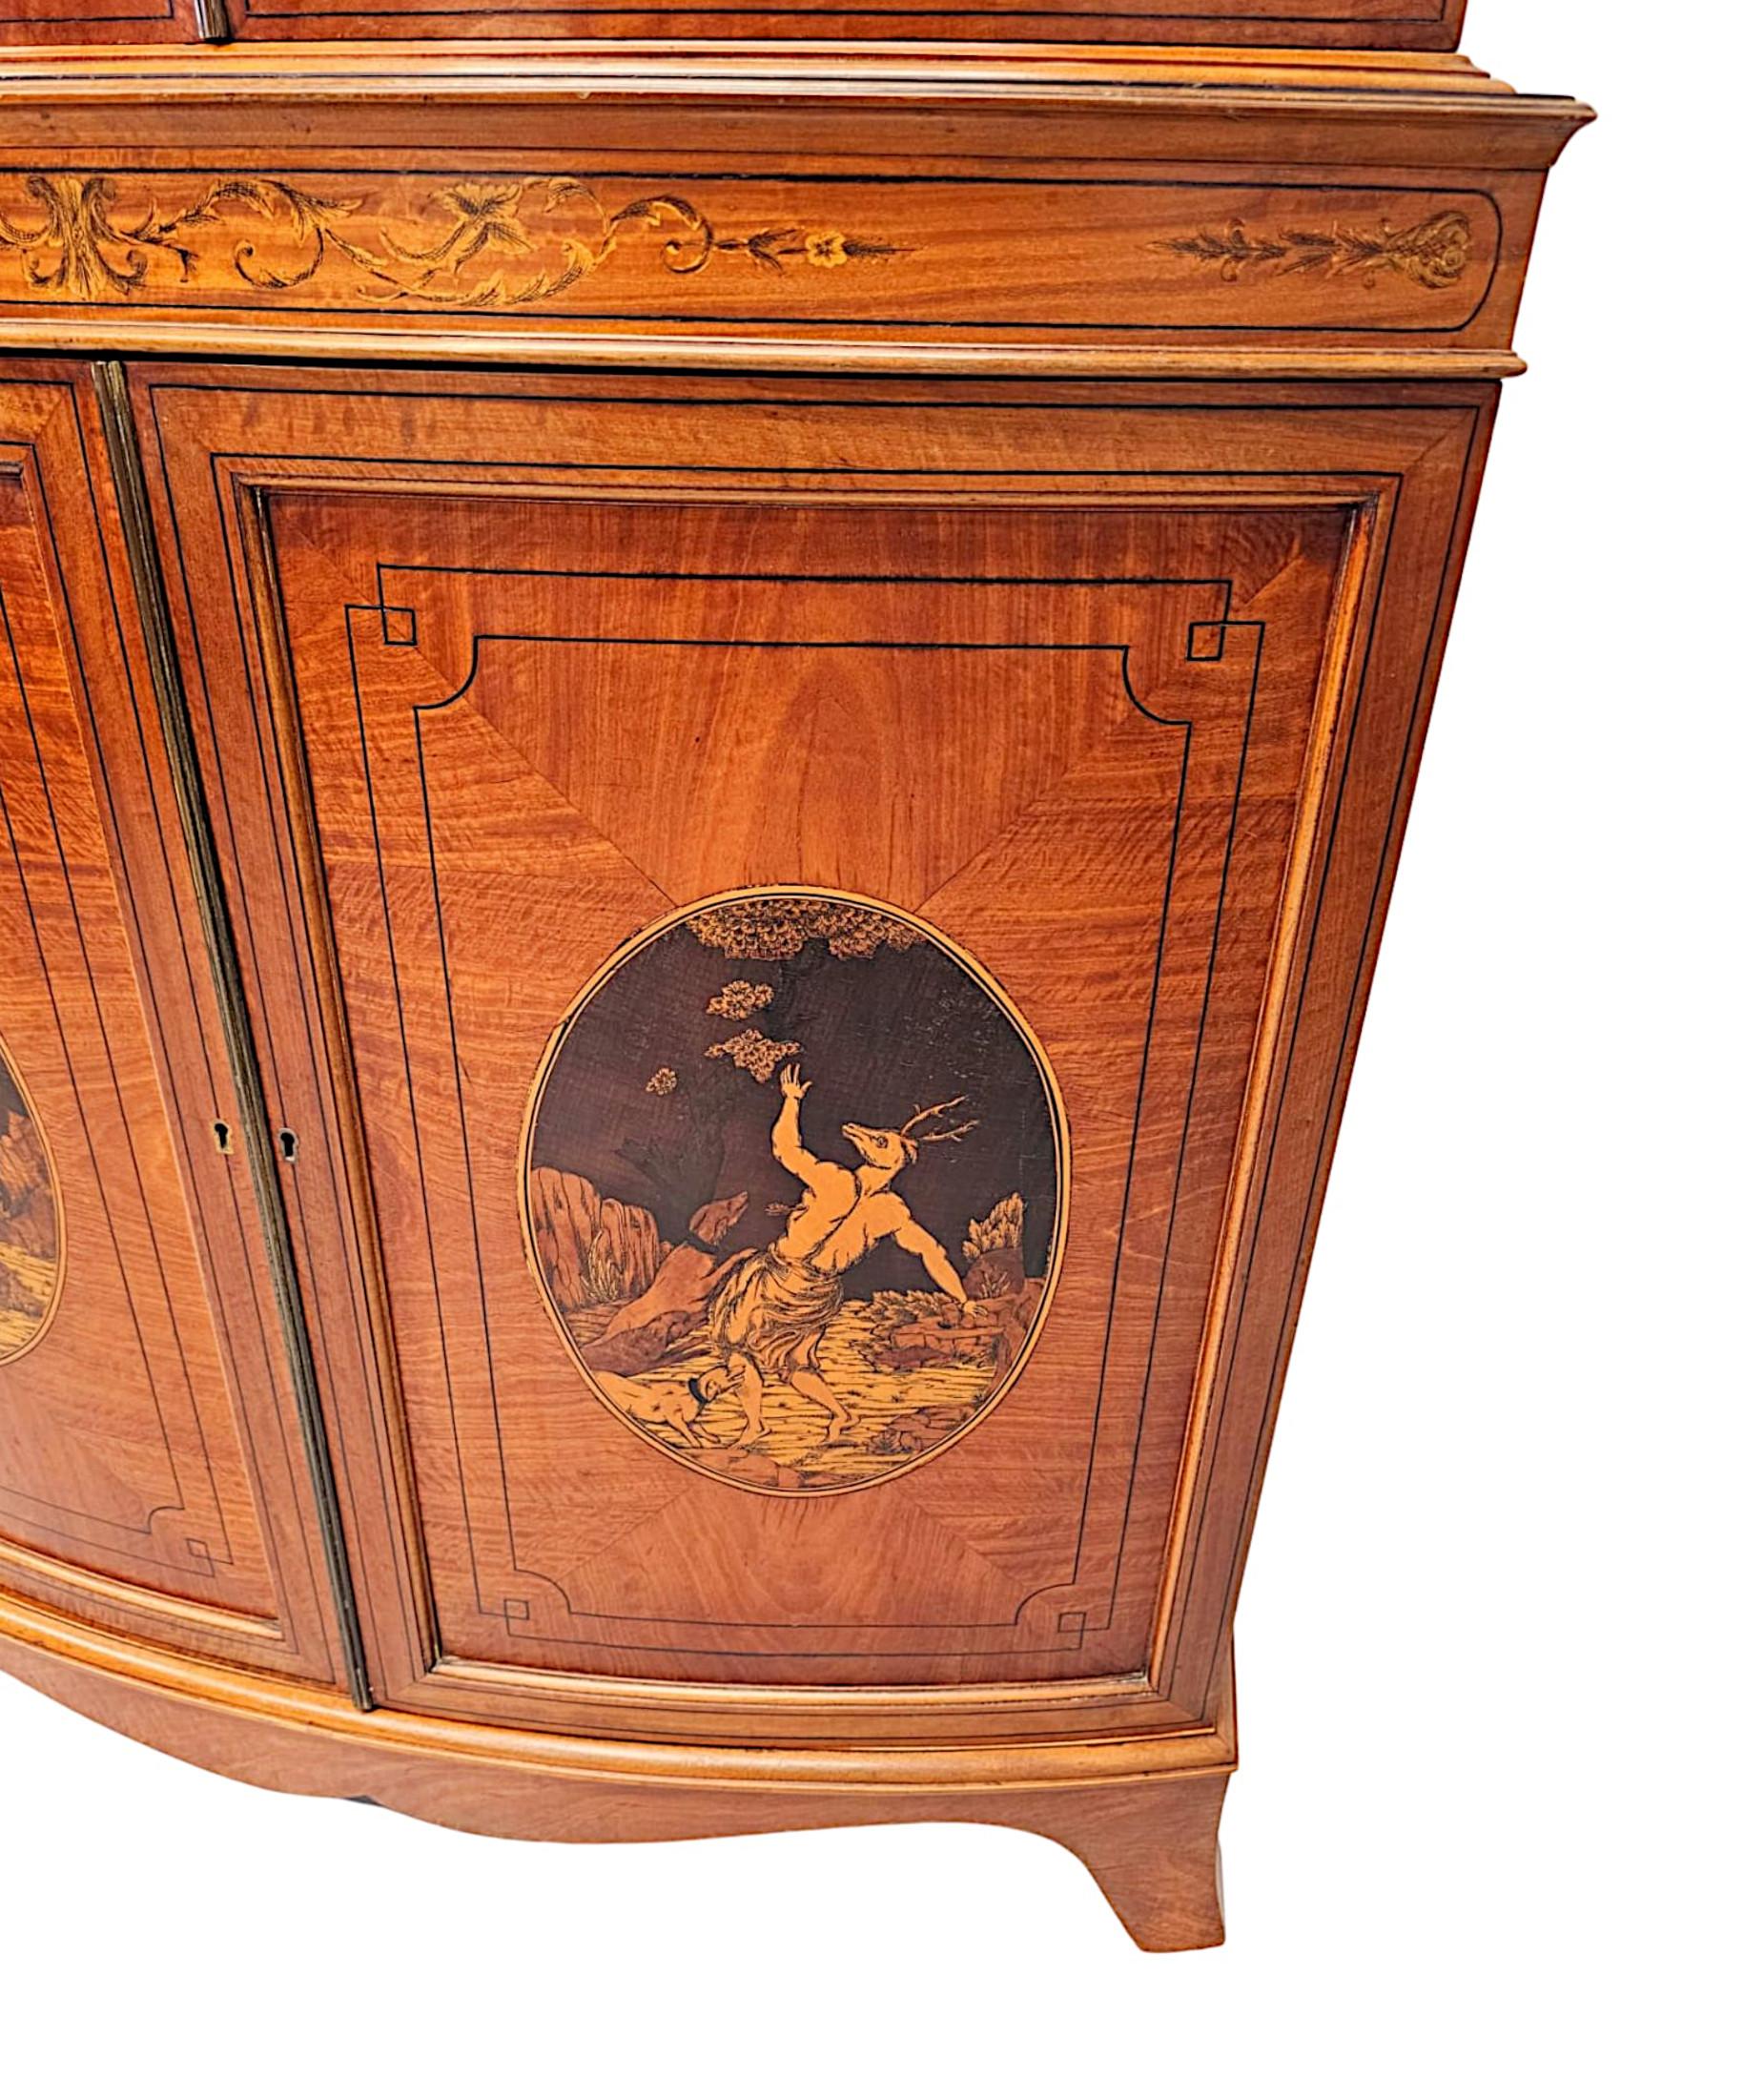 A  Fine Edwardian Marquetry Inlaid Bowfronted Bookcase afterf Edward and Roberts For Sale 4